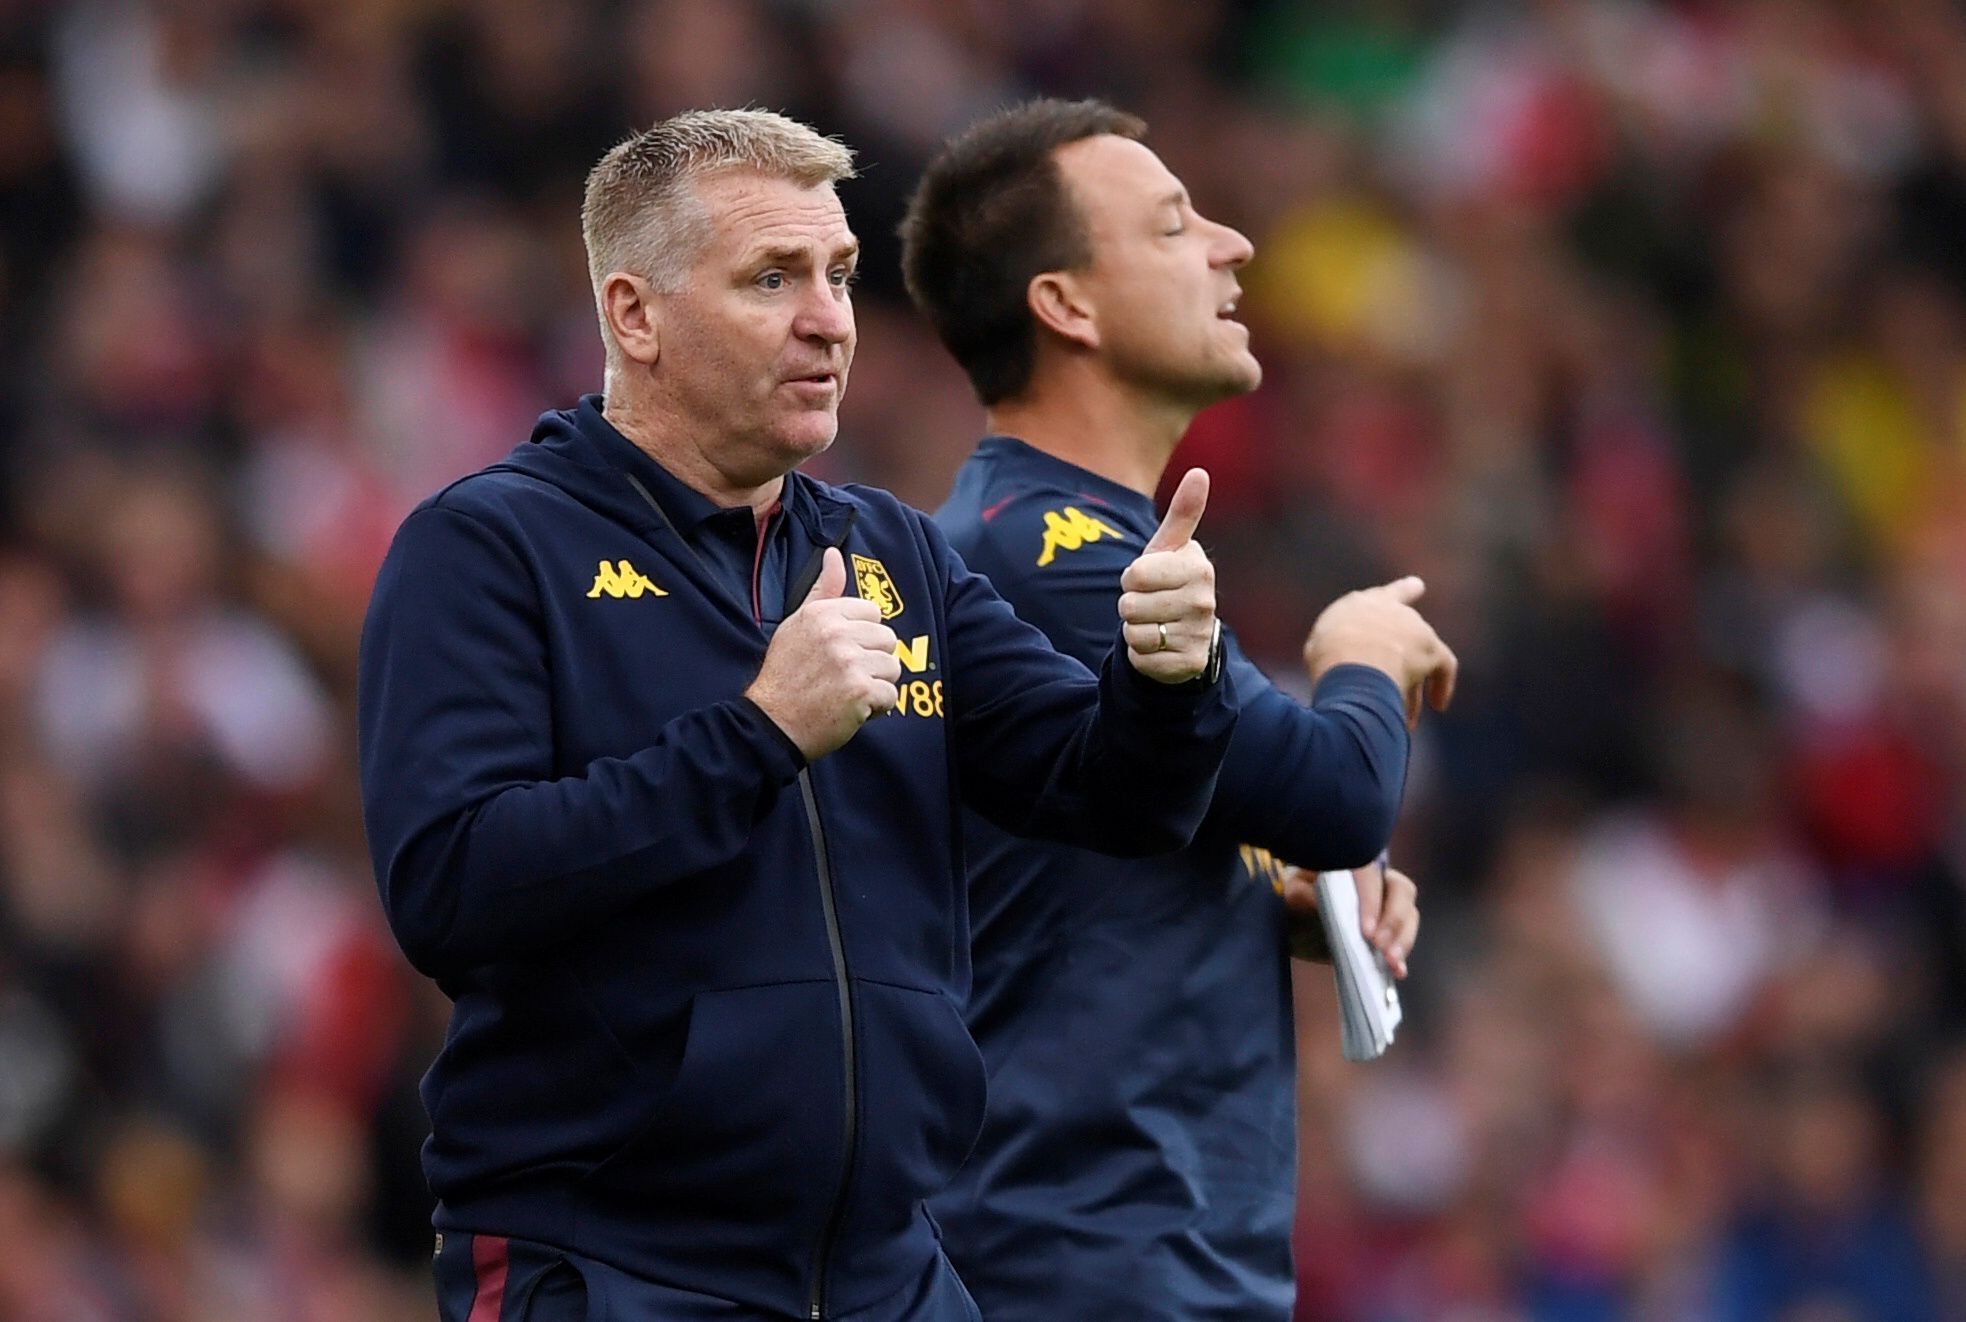 Soccer Football - Premier League - Arsenal v Aston Villa - Emirates Stadium, London, Britain - September 22, 2019  Aston Villa manager Dean Smith and assistant manager John Terry gesture during the match       Action Images via Reuters/Tony O'Brien  EDITORIAL USE ONLY. No use with unauthorized audio, video, data, fixture lists, club/league logos or 